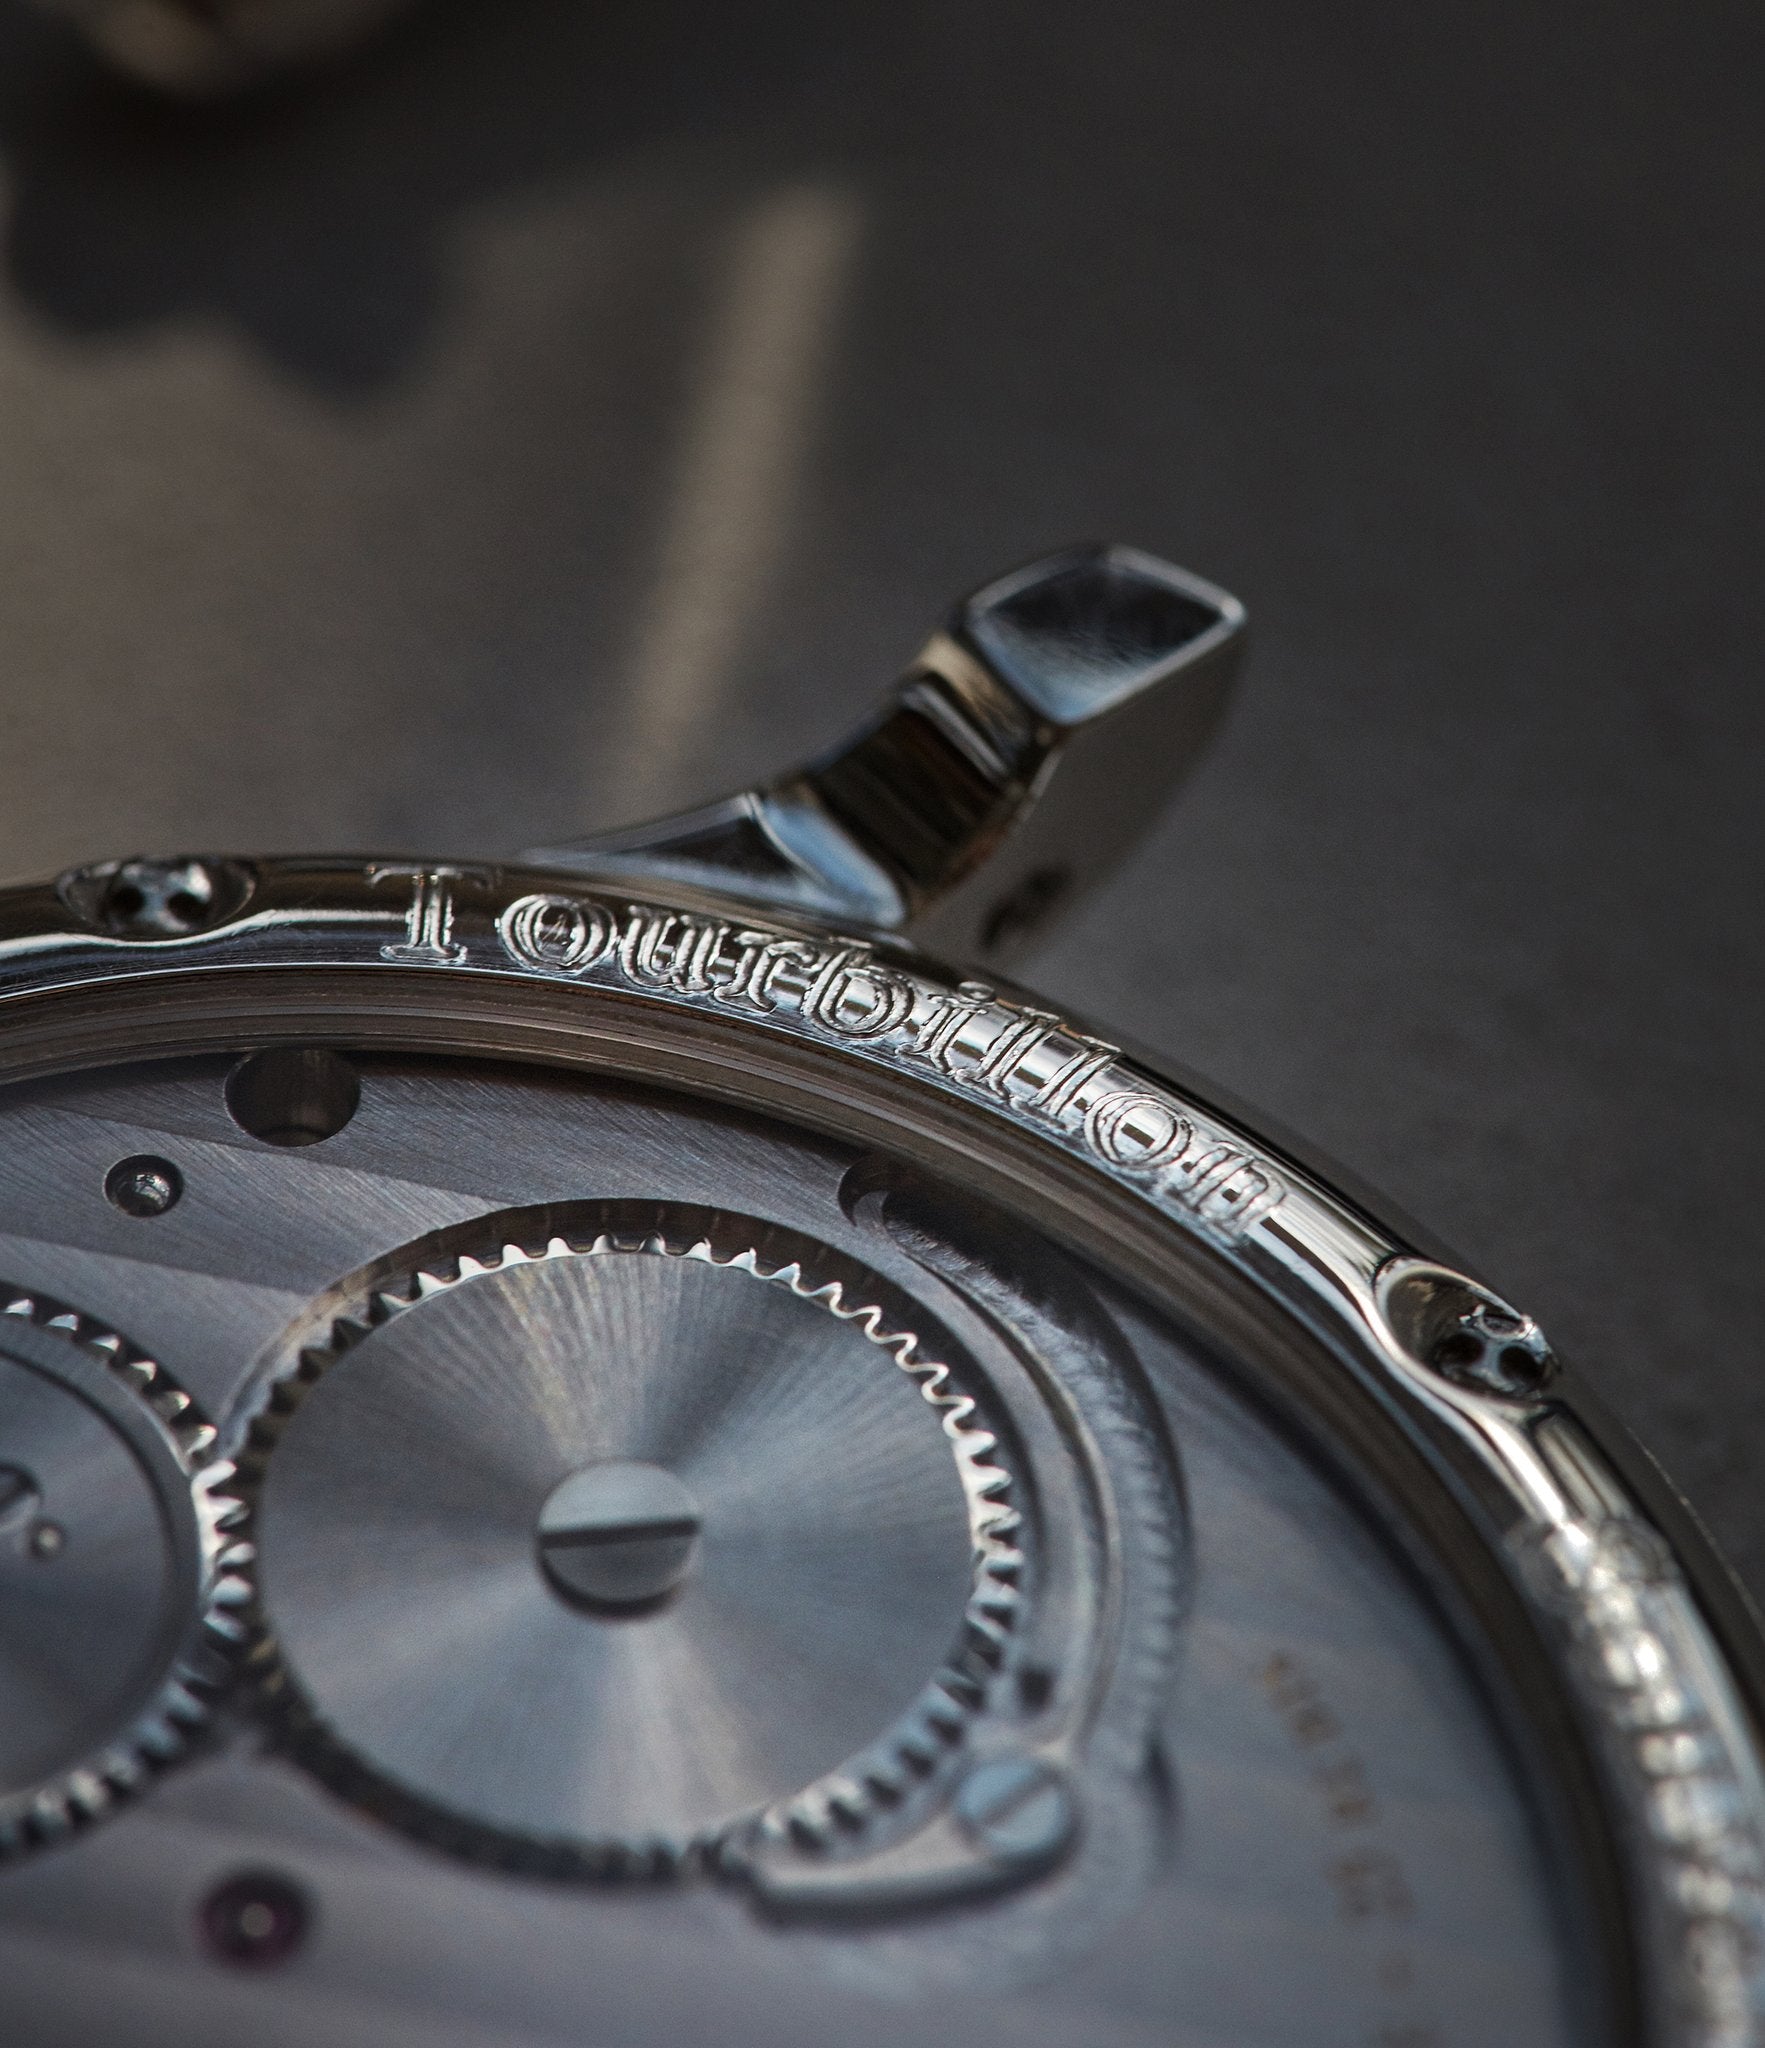 Small details found on early F.P. Journe pieces in The Rise of Neo-Vintage Watches for A Collected Man London